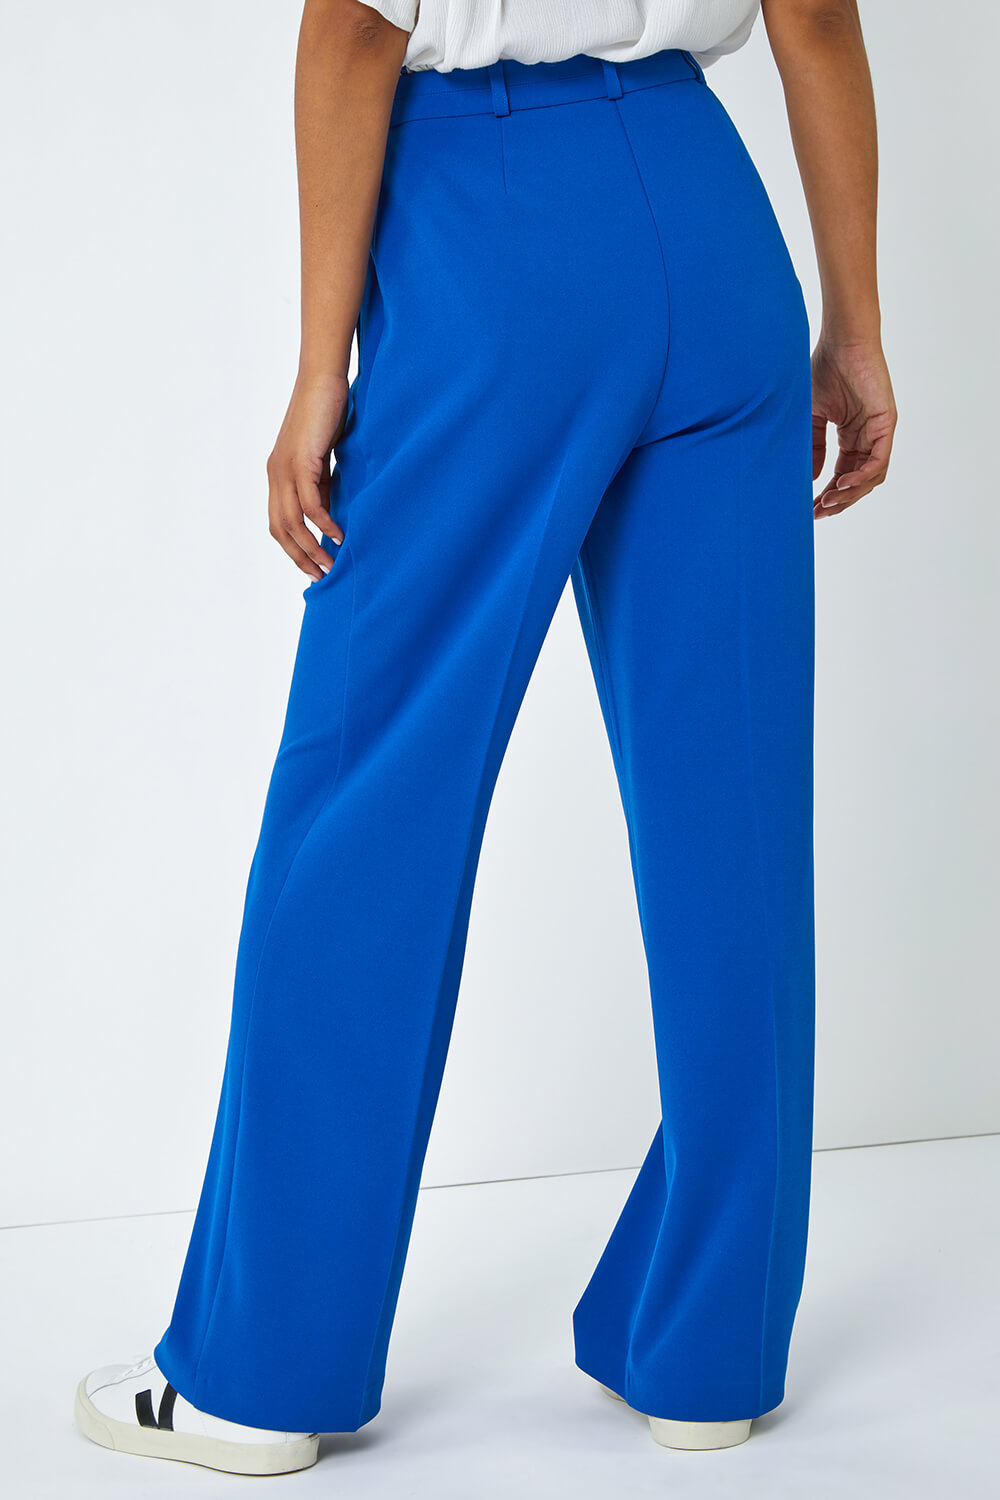 Royal Blue Wide Leg Premium Stretch Trousers, Image 4 of 5